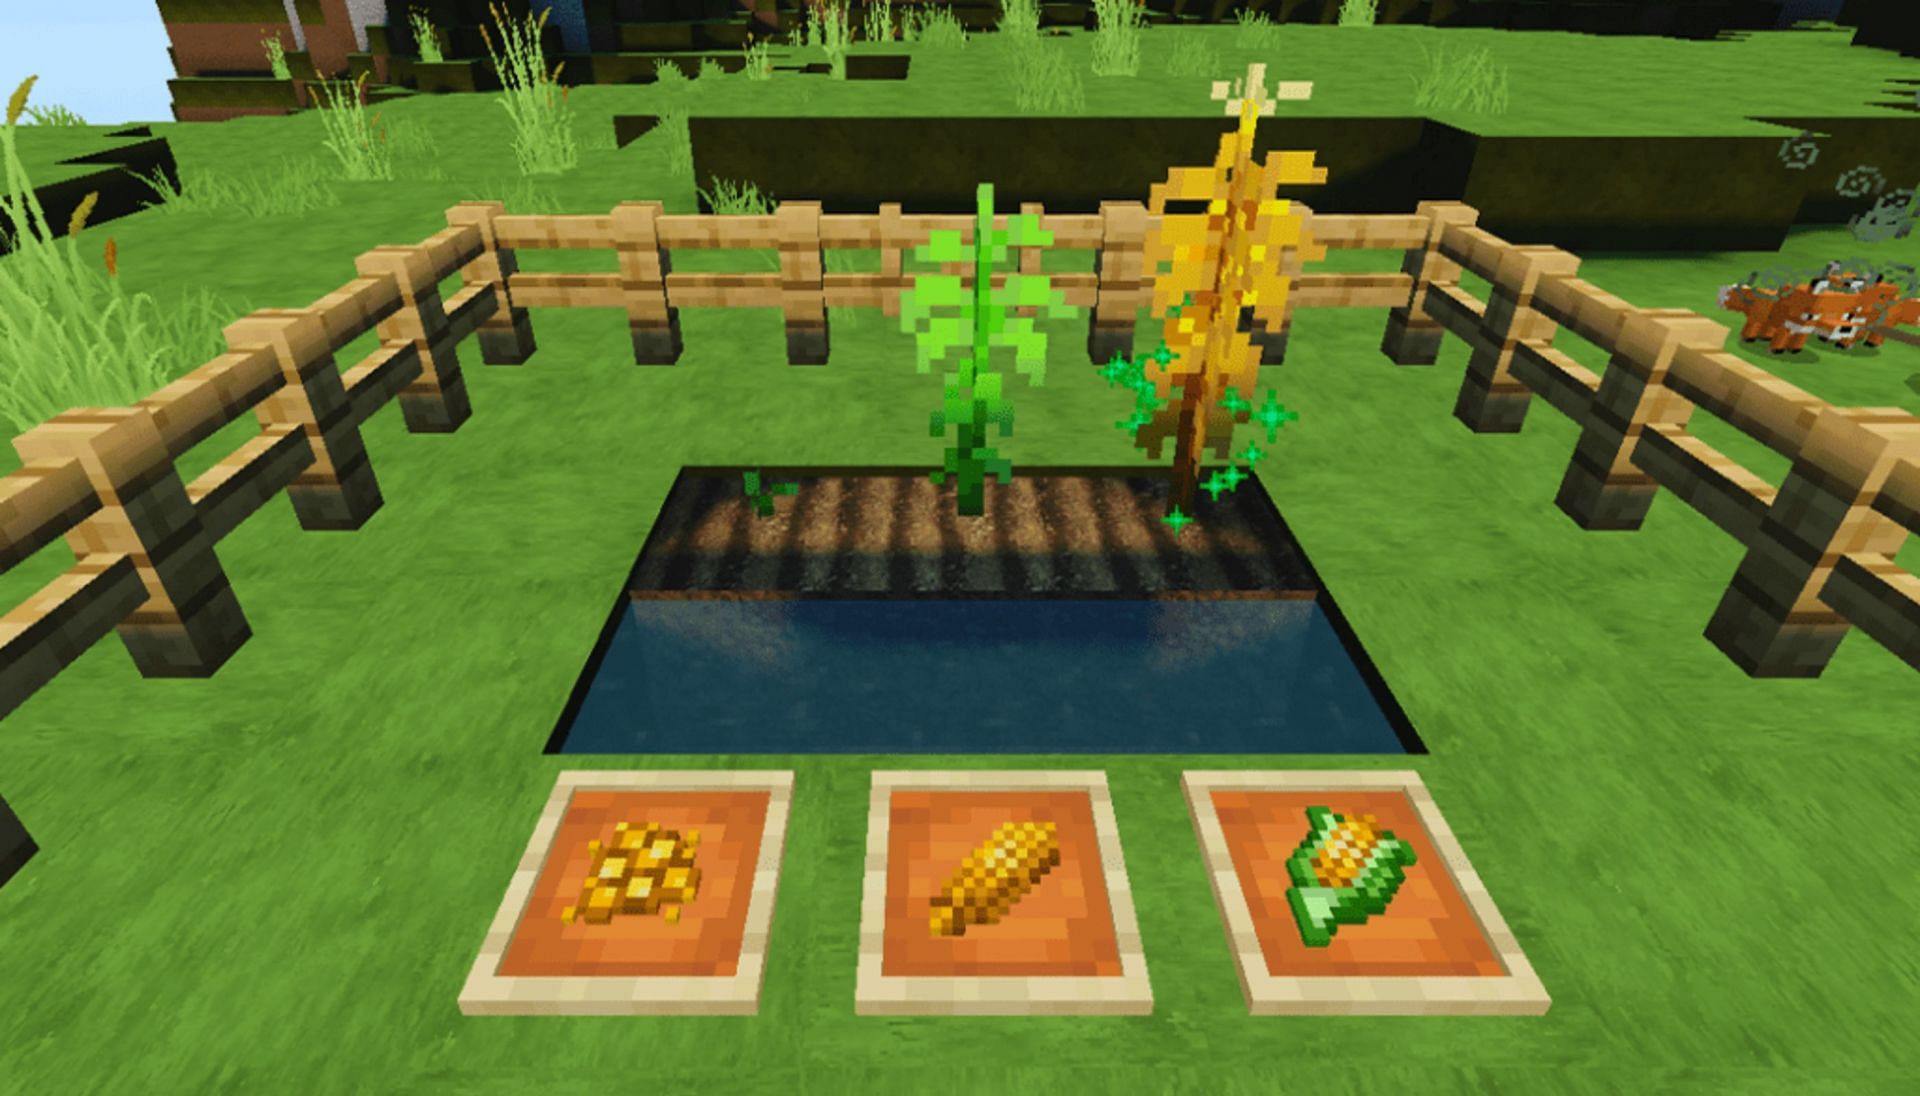 Addons can improve Minecraft&#039;s game features (Image via ClouddSpiderr/Mcpedl)